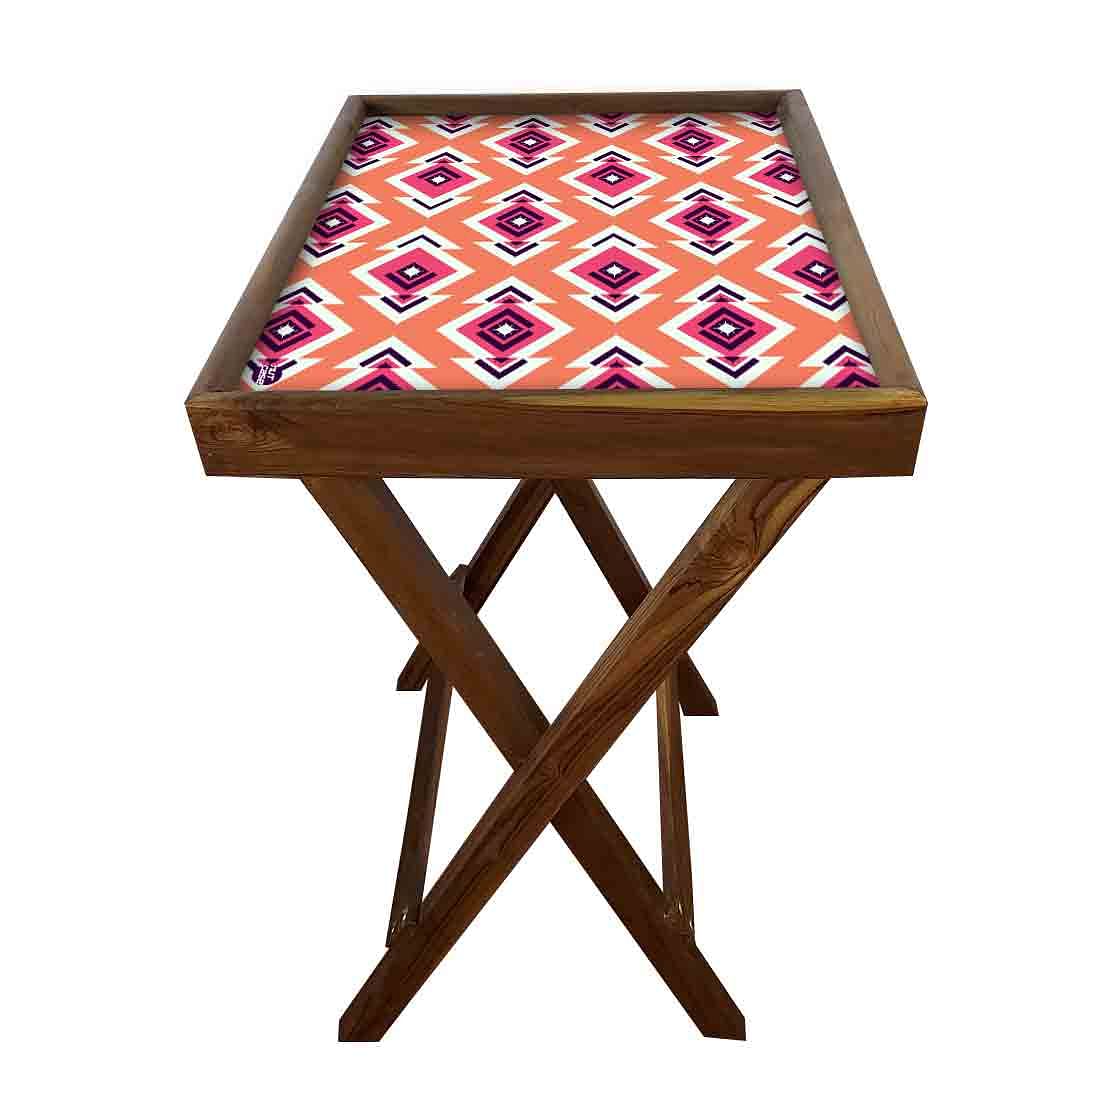 Wooden TV Trays Table Bar Snack Serving Tables - Diamonds Nutcase